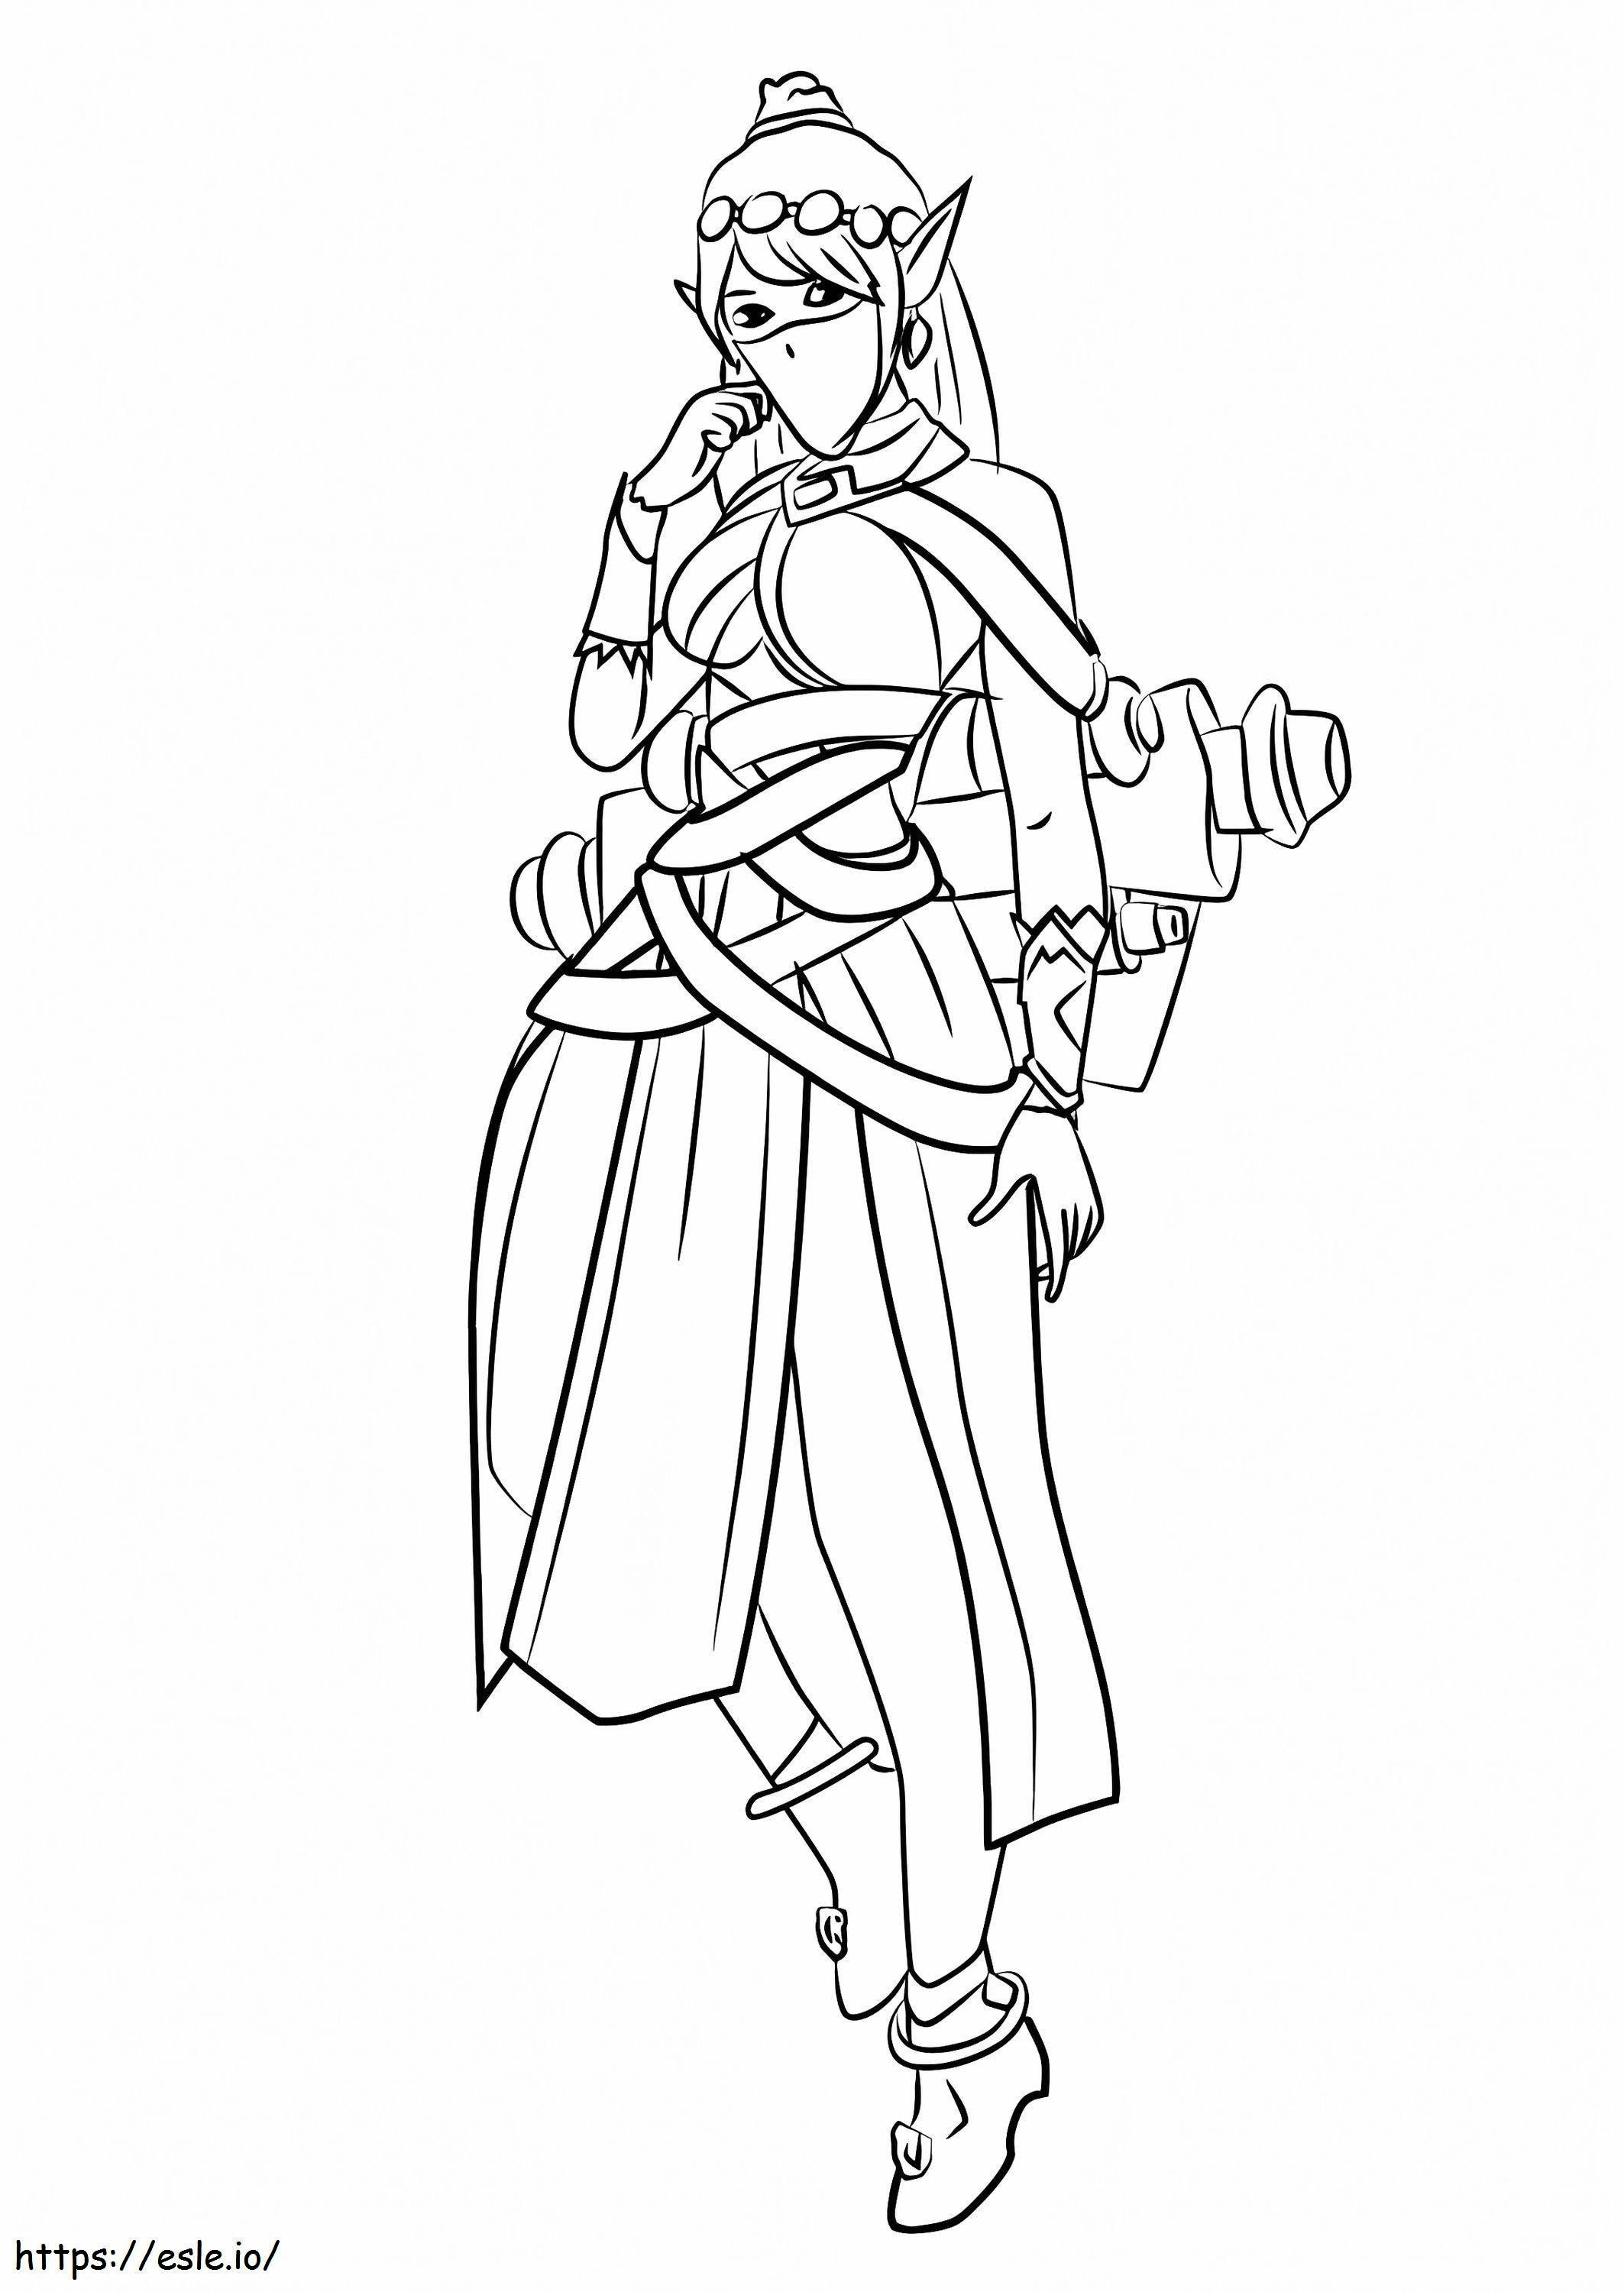 Ying From Paladins coloring page